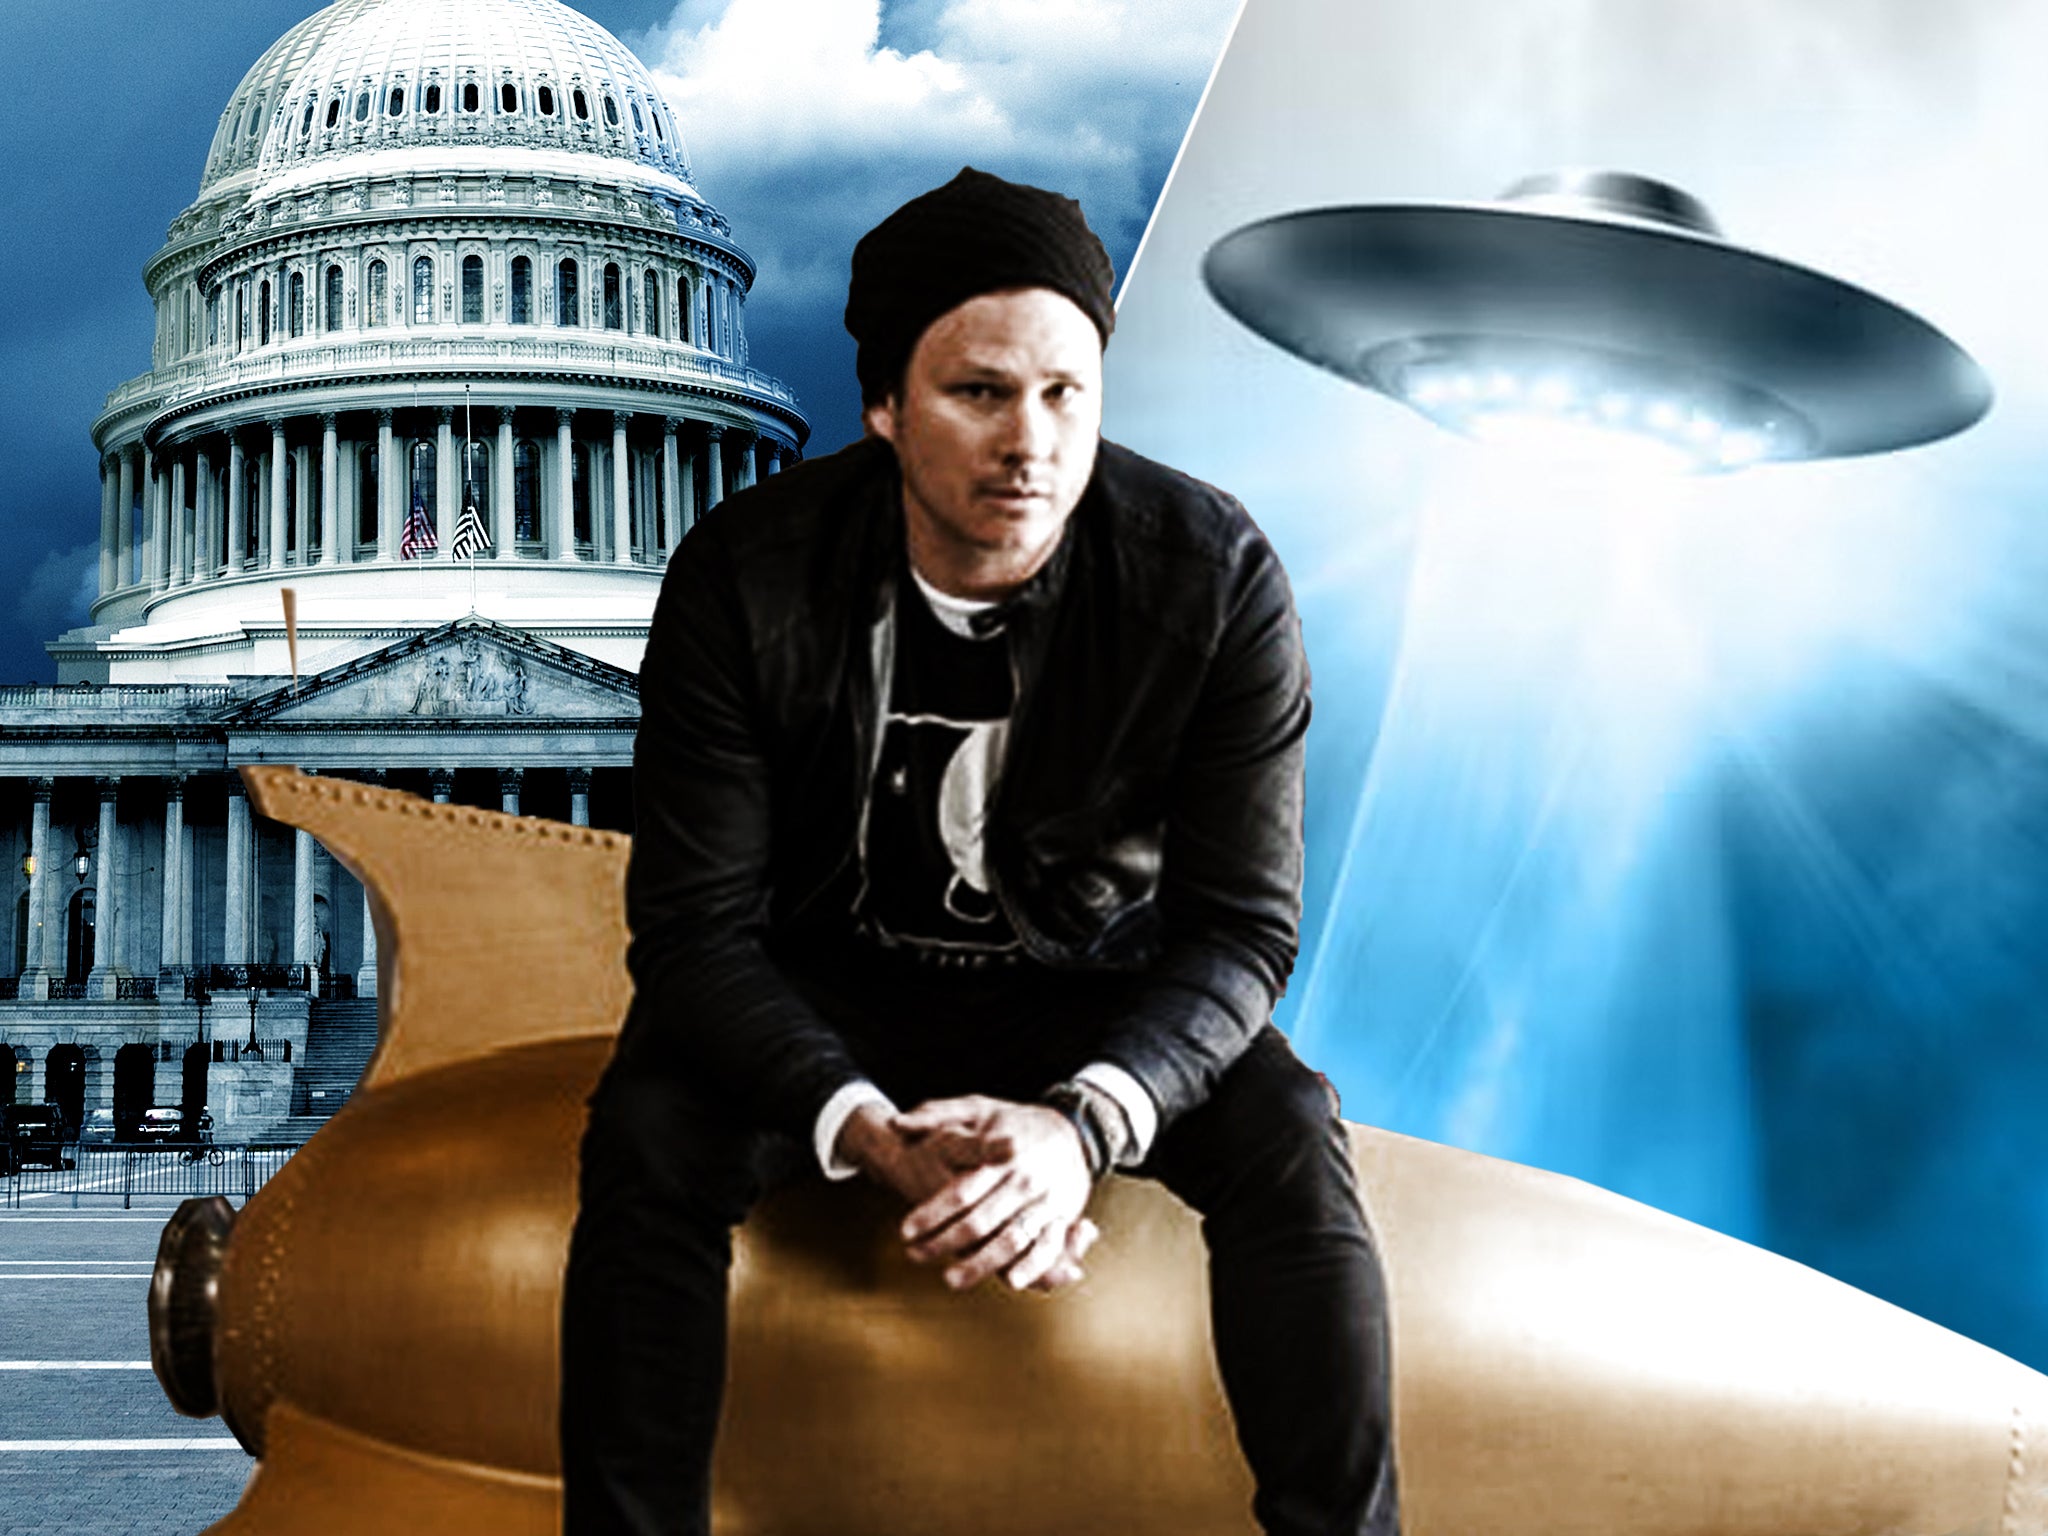 Tom DeLonge, 47, leapt from Blink-182 fame to UFO research, proving instrumental in the release of gripping footage